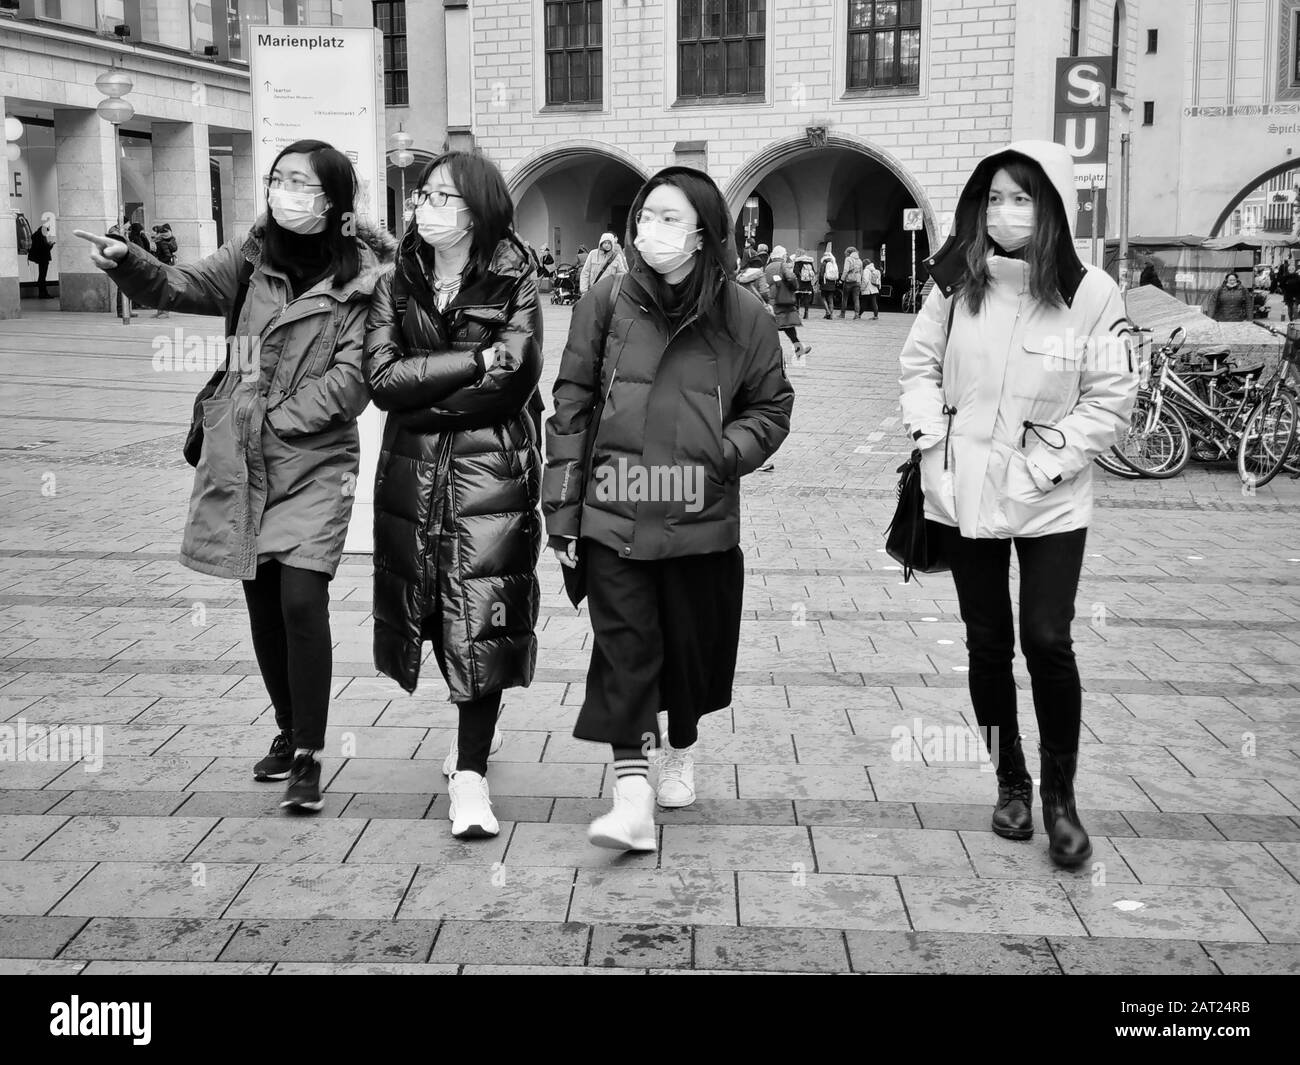 Munich, Bavaria, Germany. 30th Jan, 2020. A group of people are among the increasing number of tourists and residents of the city of Munich, Germany wearing breathing masks on the streets in response to Germany's first case of Corona Virus in nearby Starnberg. The affected was infected by a Chinese coworker visiting from Shanghai and is currently at Klinikum Schwabing in Munich. Credit: Sachelle Babbar/ZUMA Wire/Alamy Live News Stock Photo